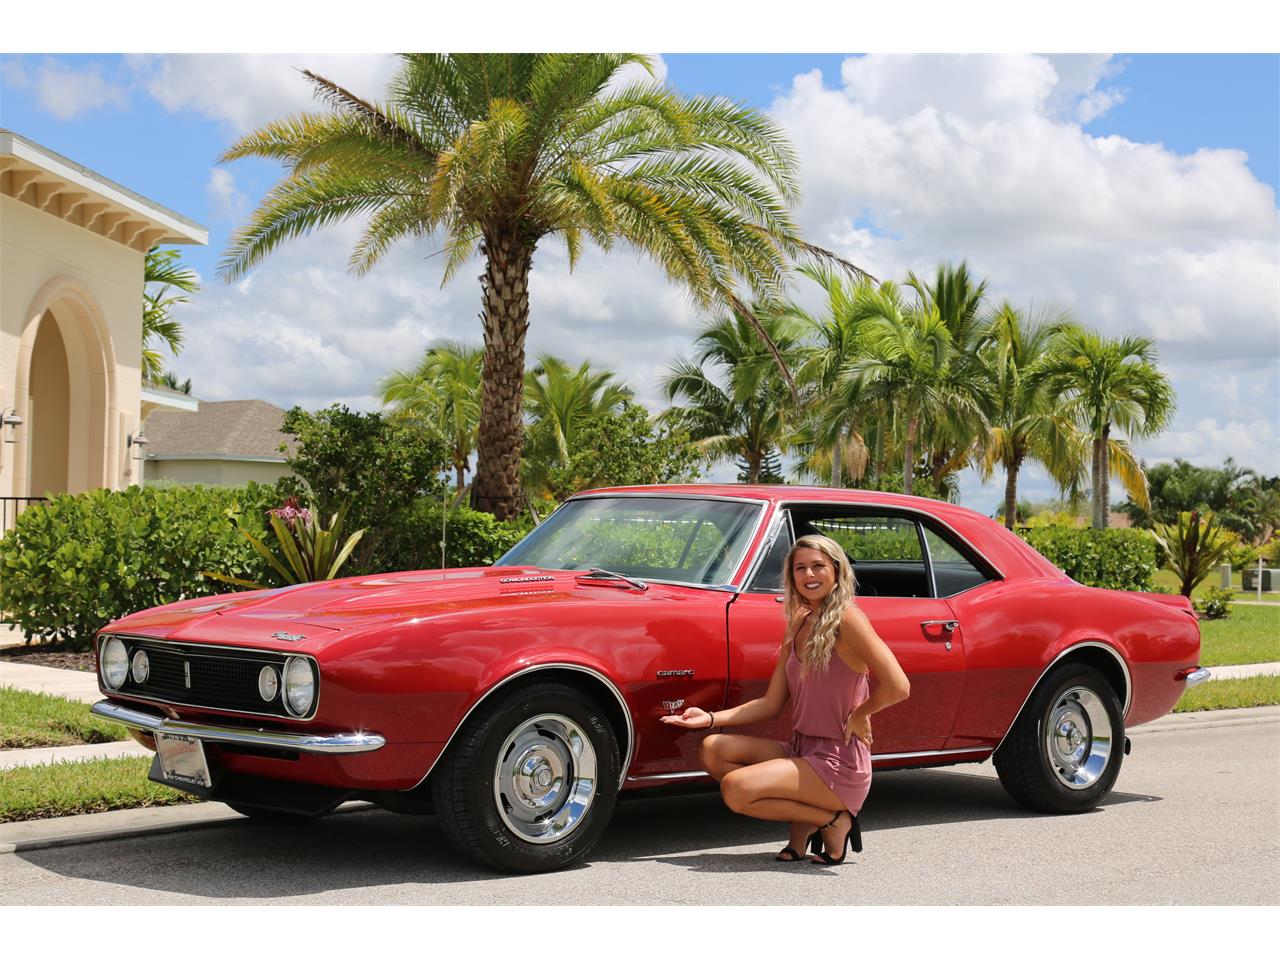 1967 Chevrolet Camaro for sale in Fort Myers, FL / classiccarsbay.com